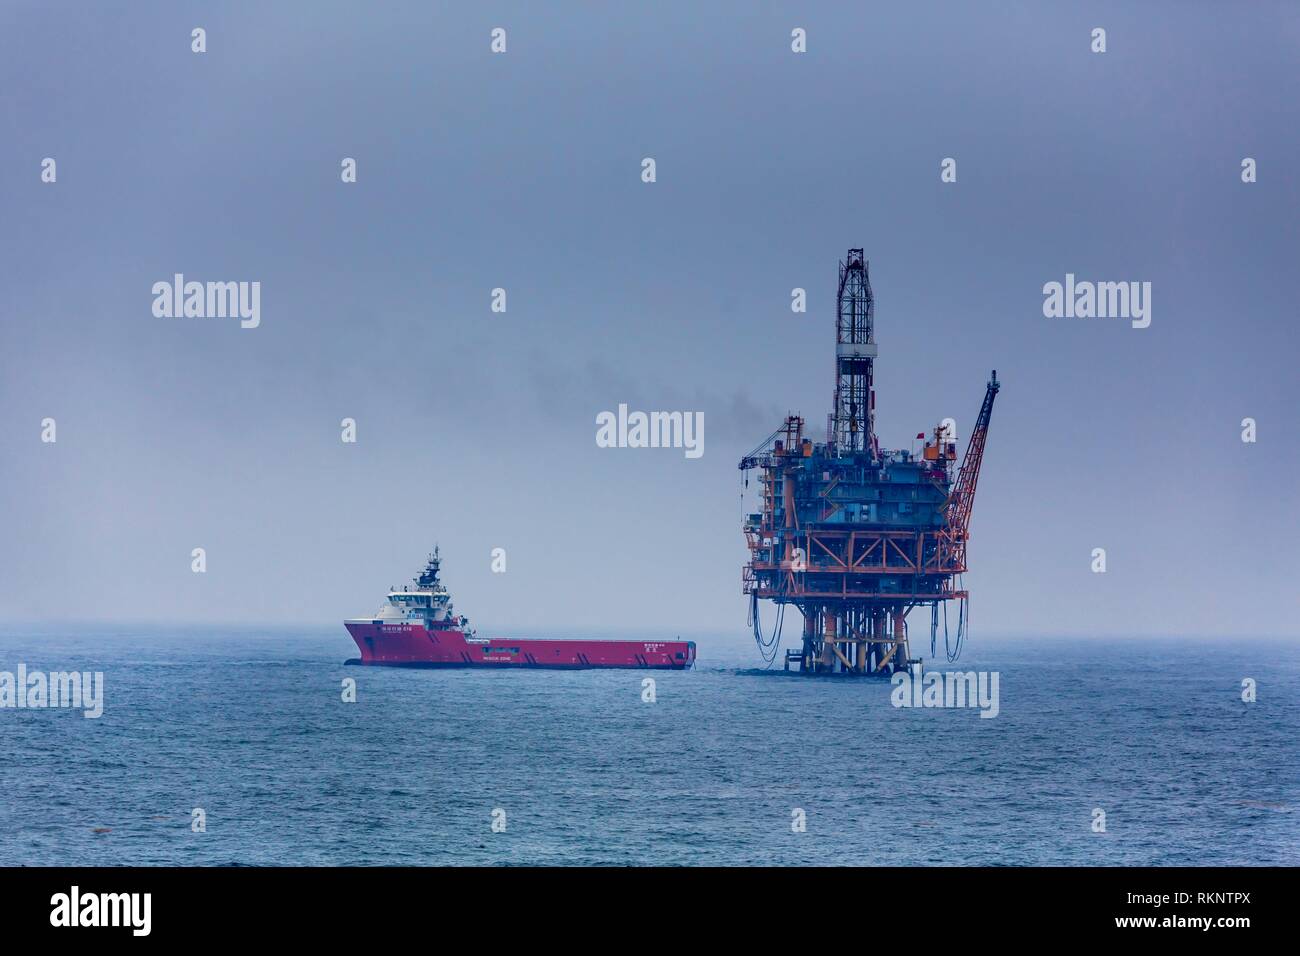 An ocean oil rig and supply ship in the South China Sea near Japan. Stock Photo